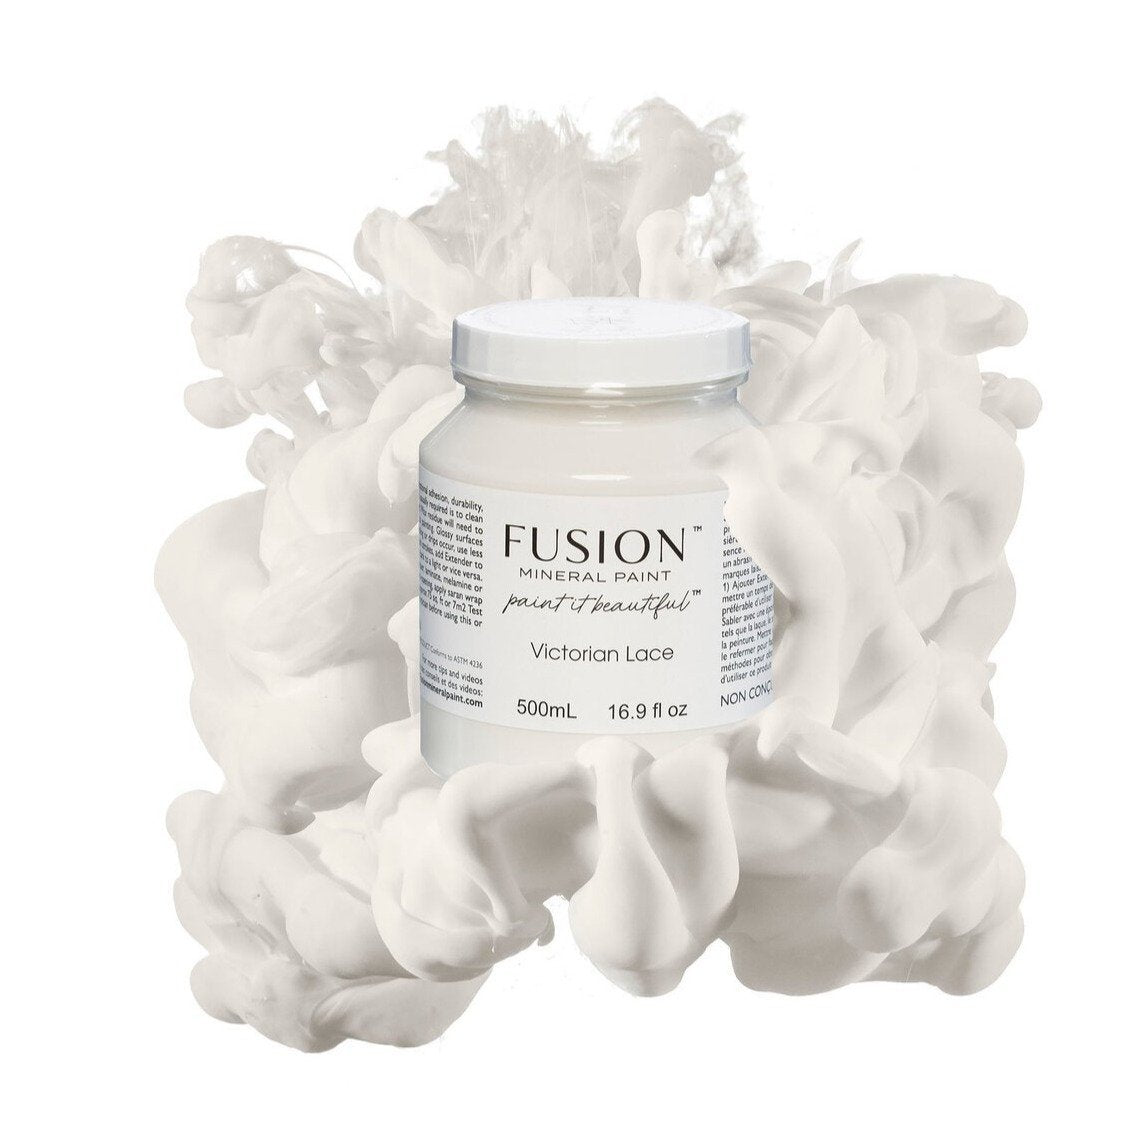 VICTORIAN LACE - Fusion Mineral Paint - 37ml, 500ml